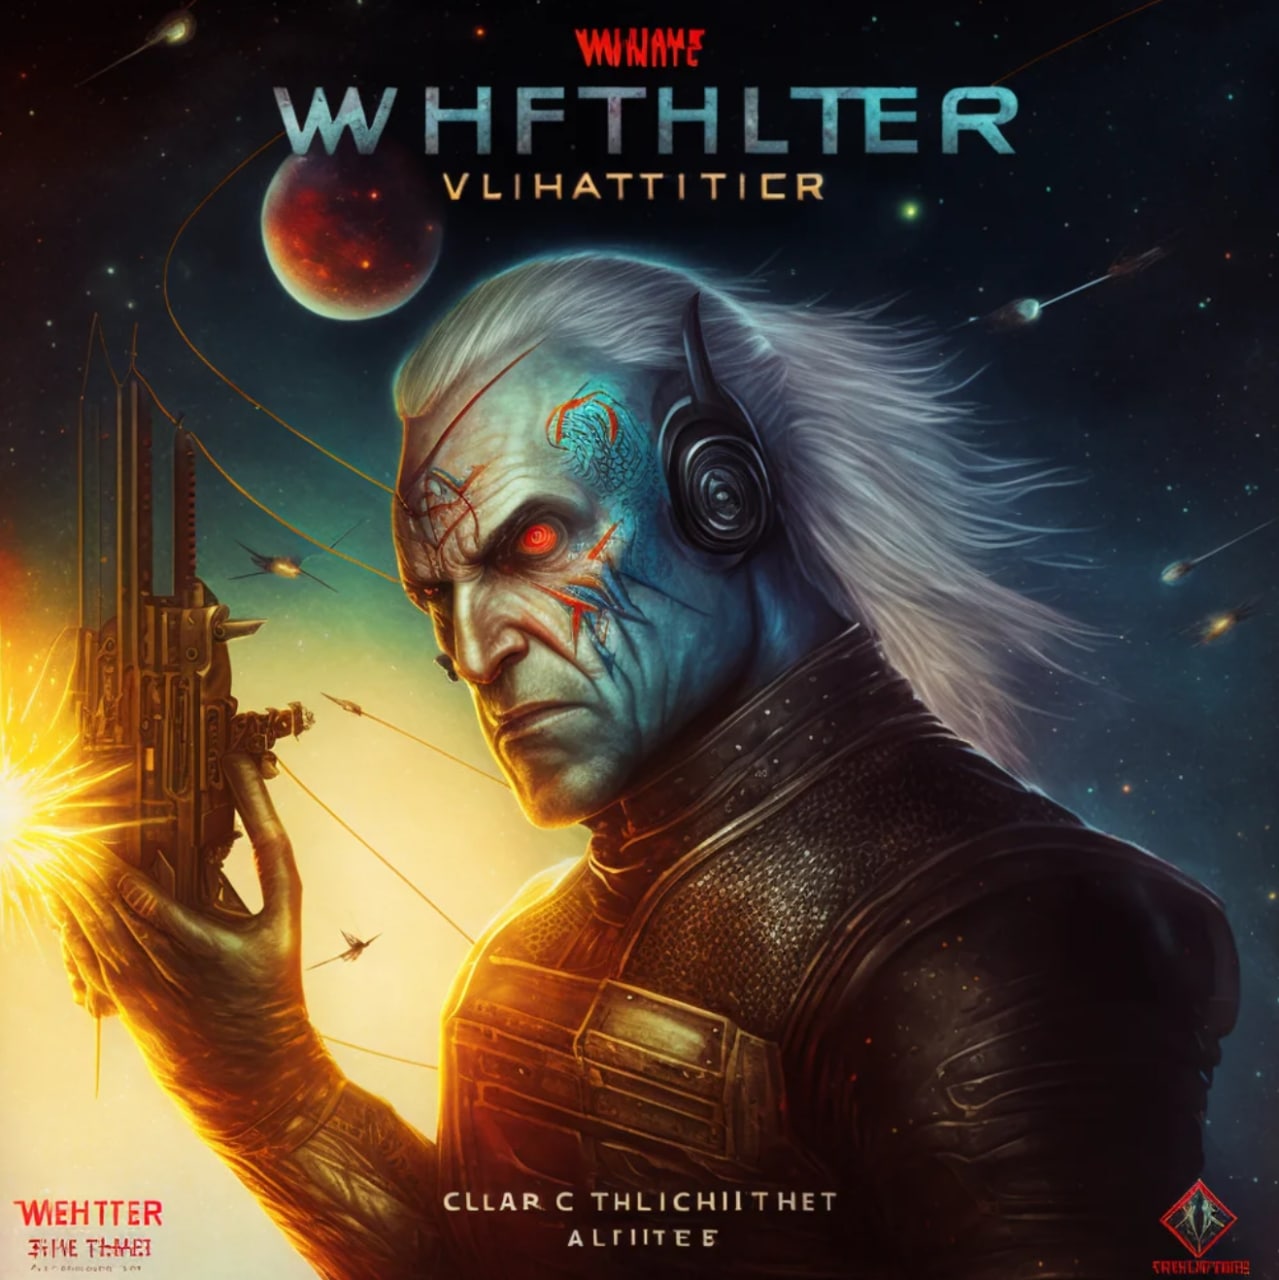 The Witcher V: Galactic Hunter